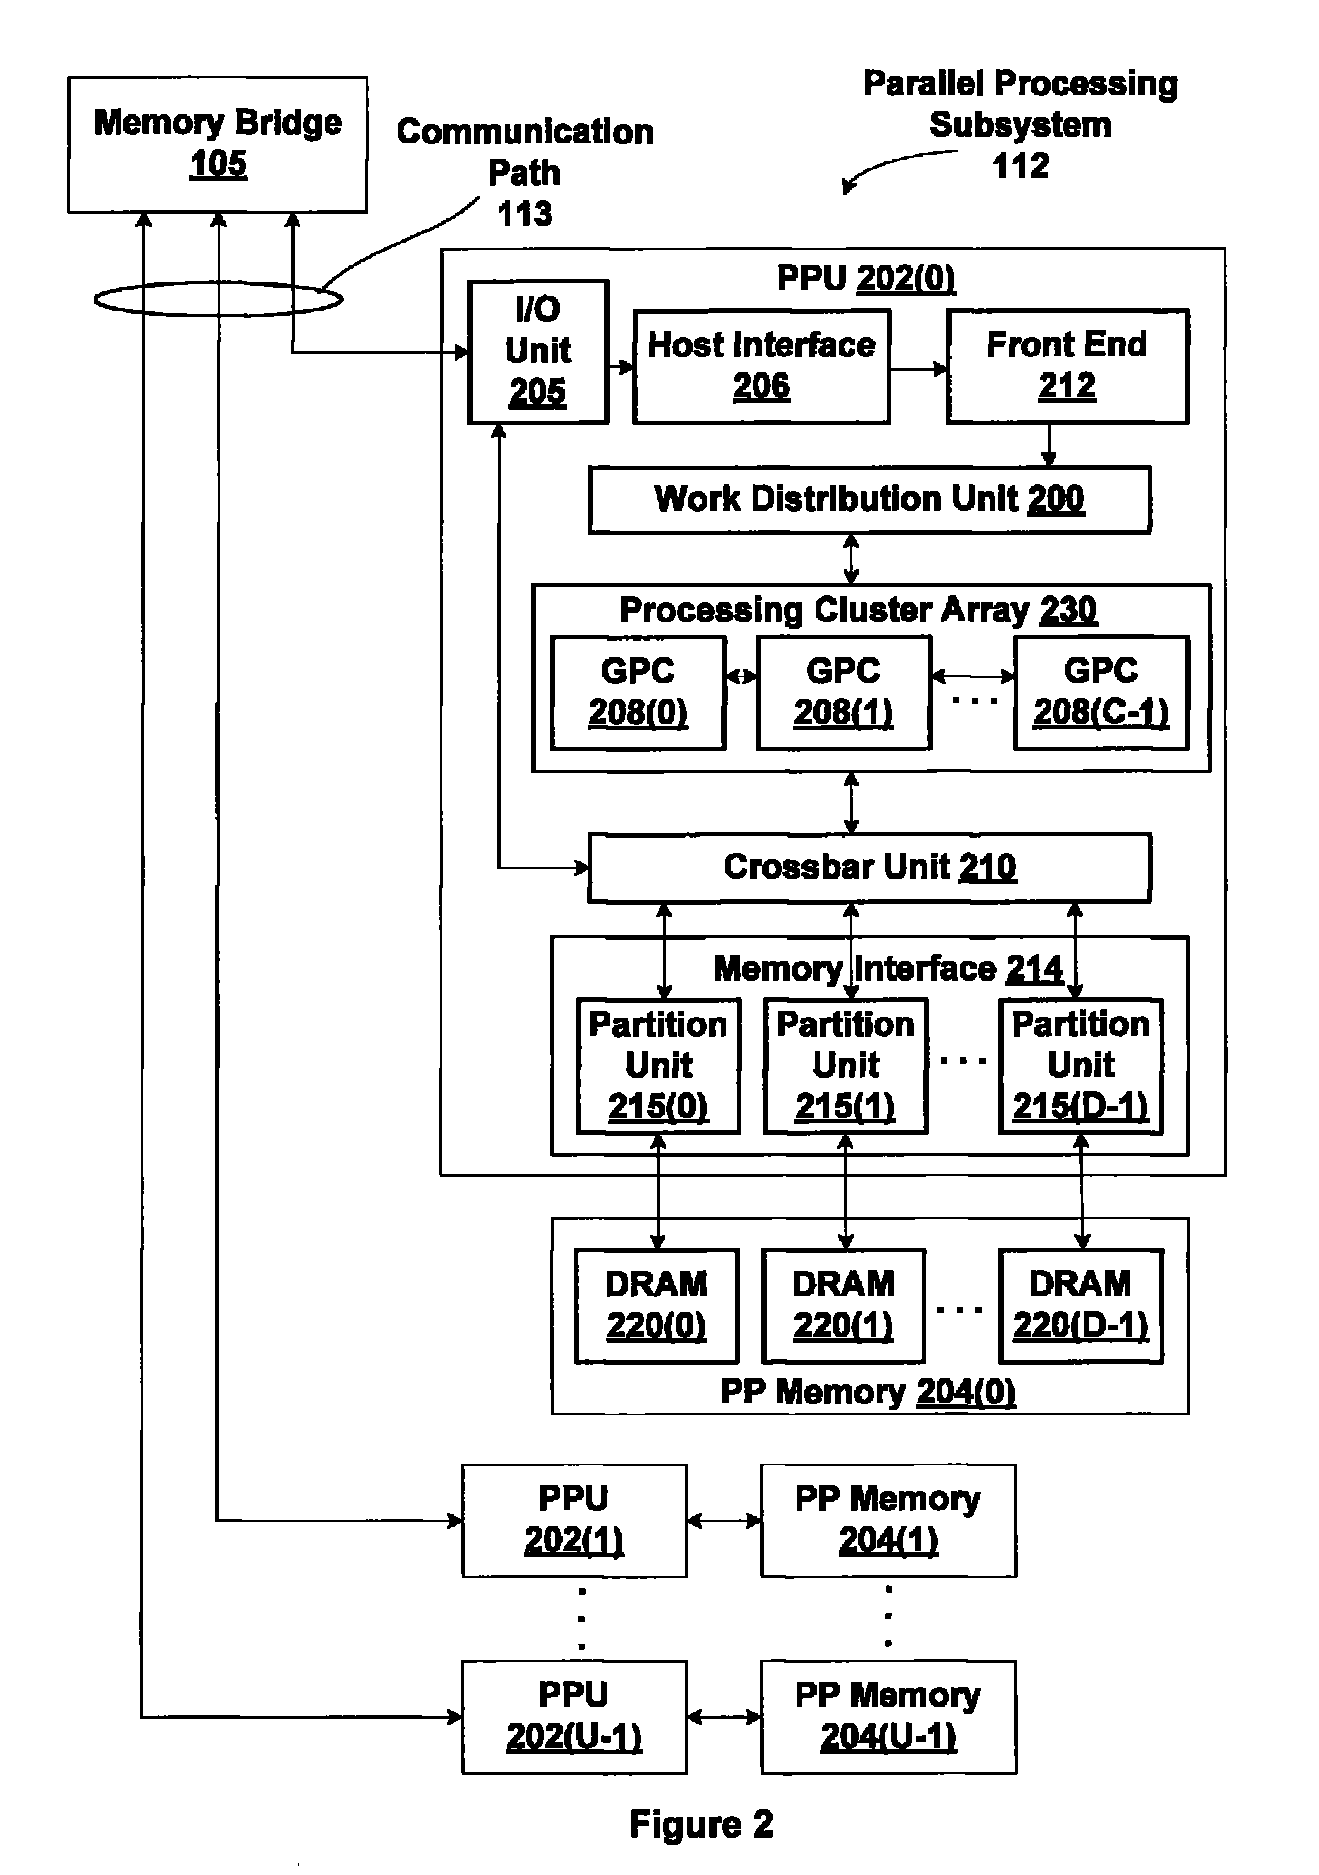 Two-level scheduler for multi-threaded processing